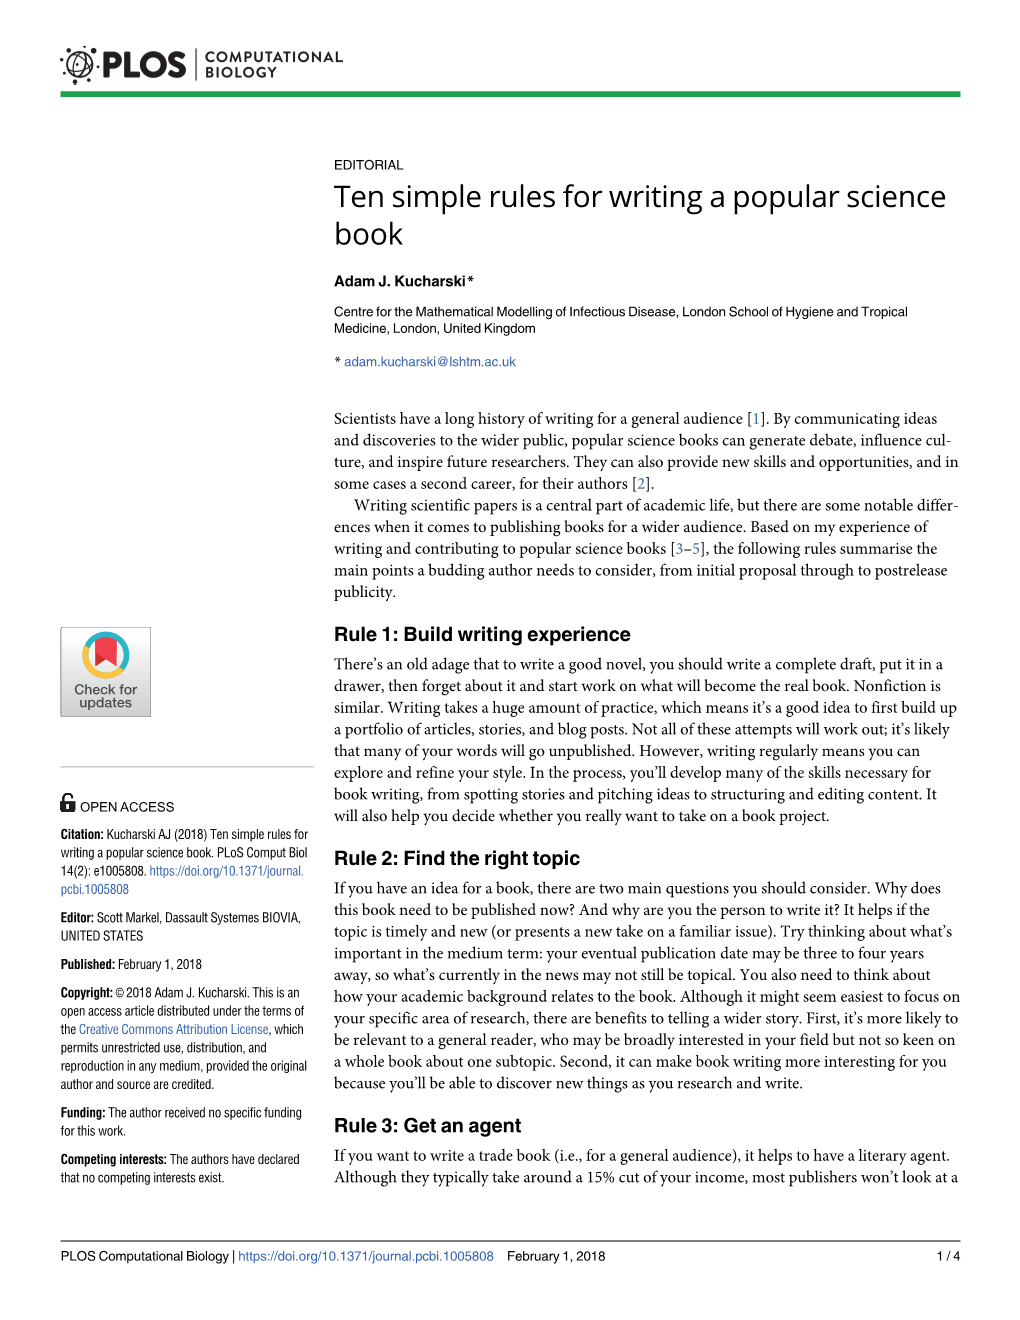 Ten Simple Rules for Writing a Popular Science Book